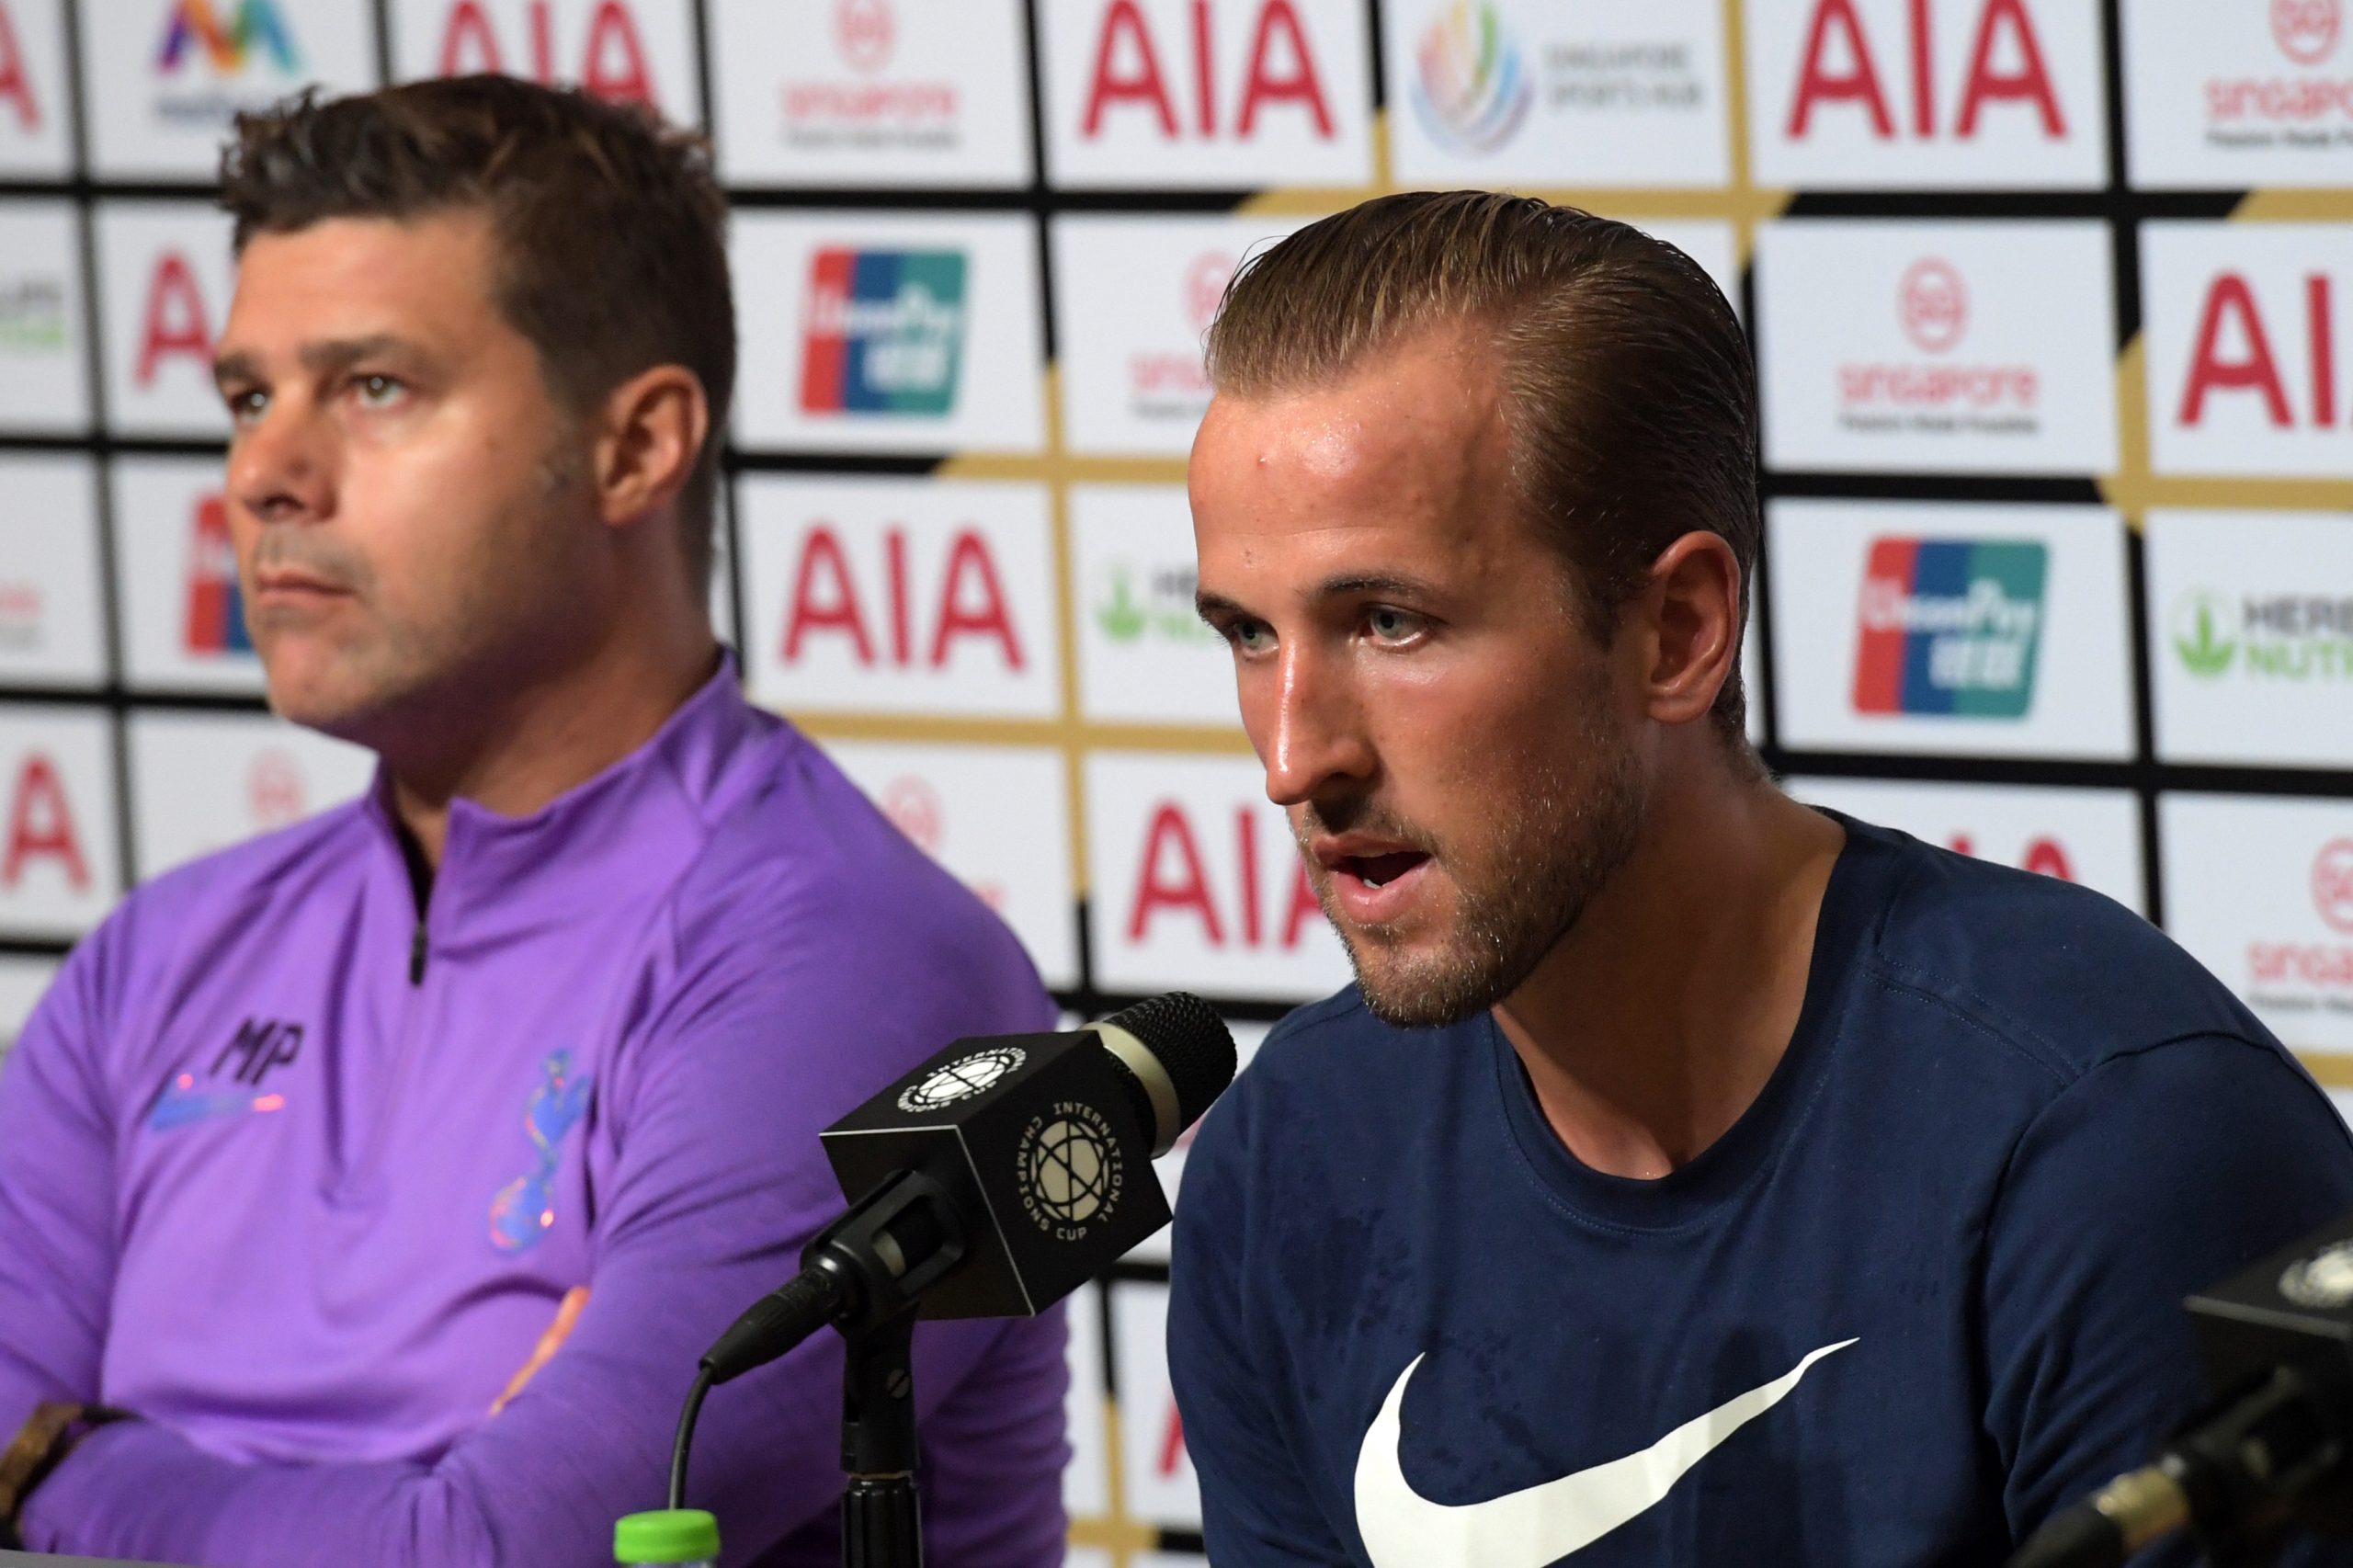 Tottenham Hotspur's Harry Kane and team manager Mauricio Pochettino attend a press conference - July 2019.